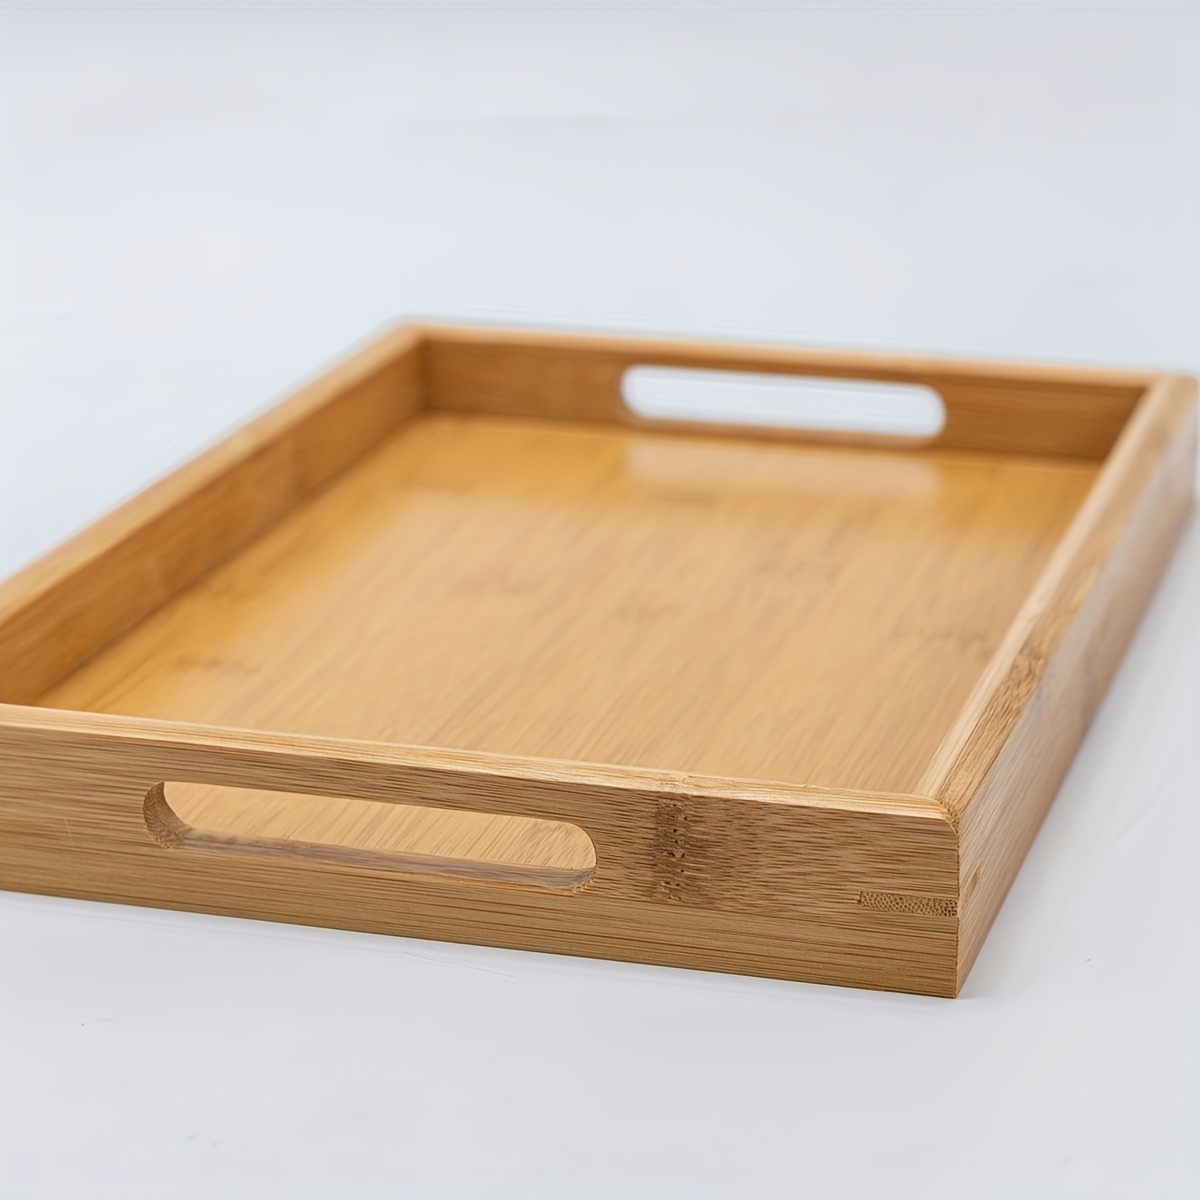  Wooden Living - Serving Tray/Wooden Trays with Handles